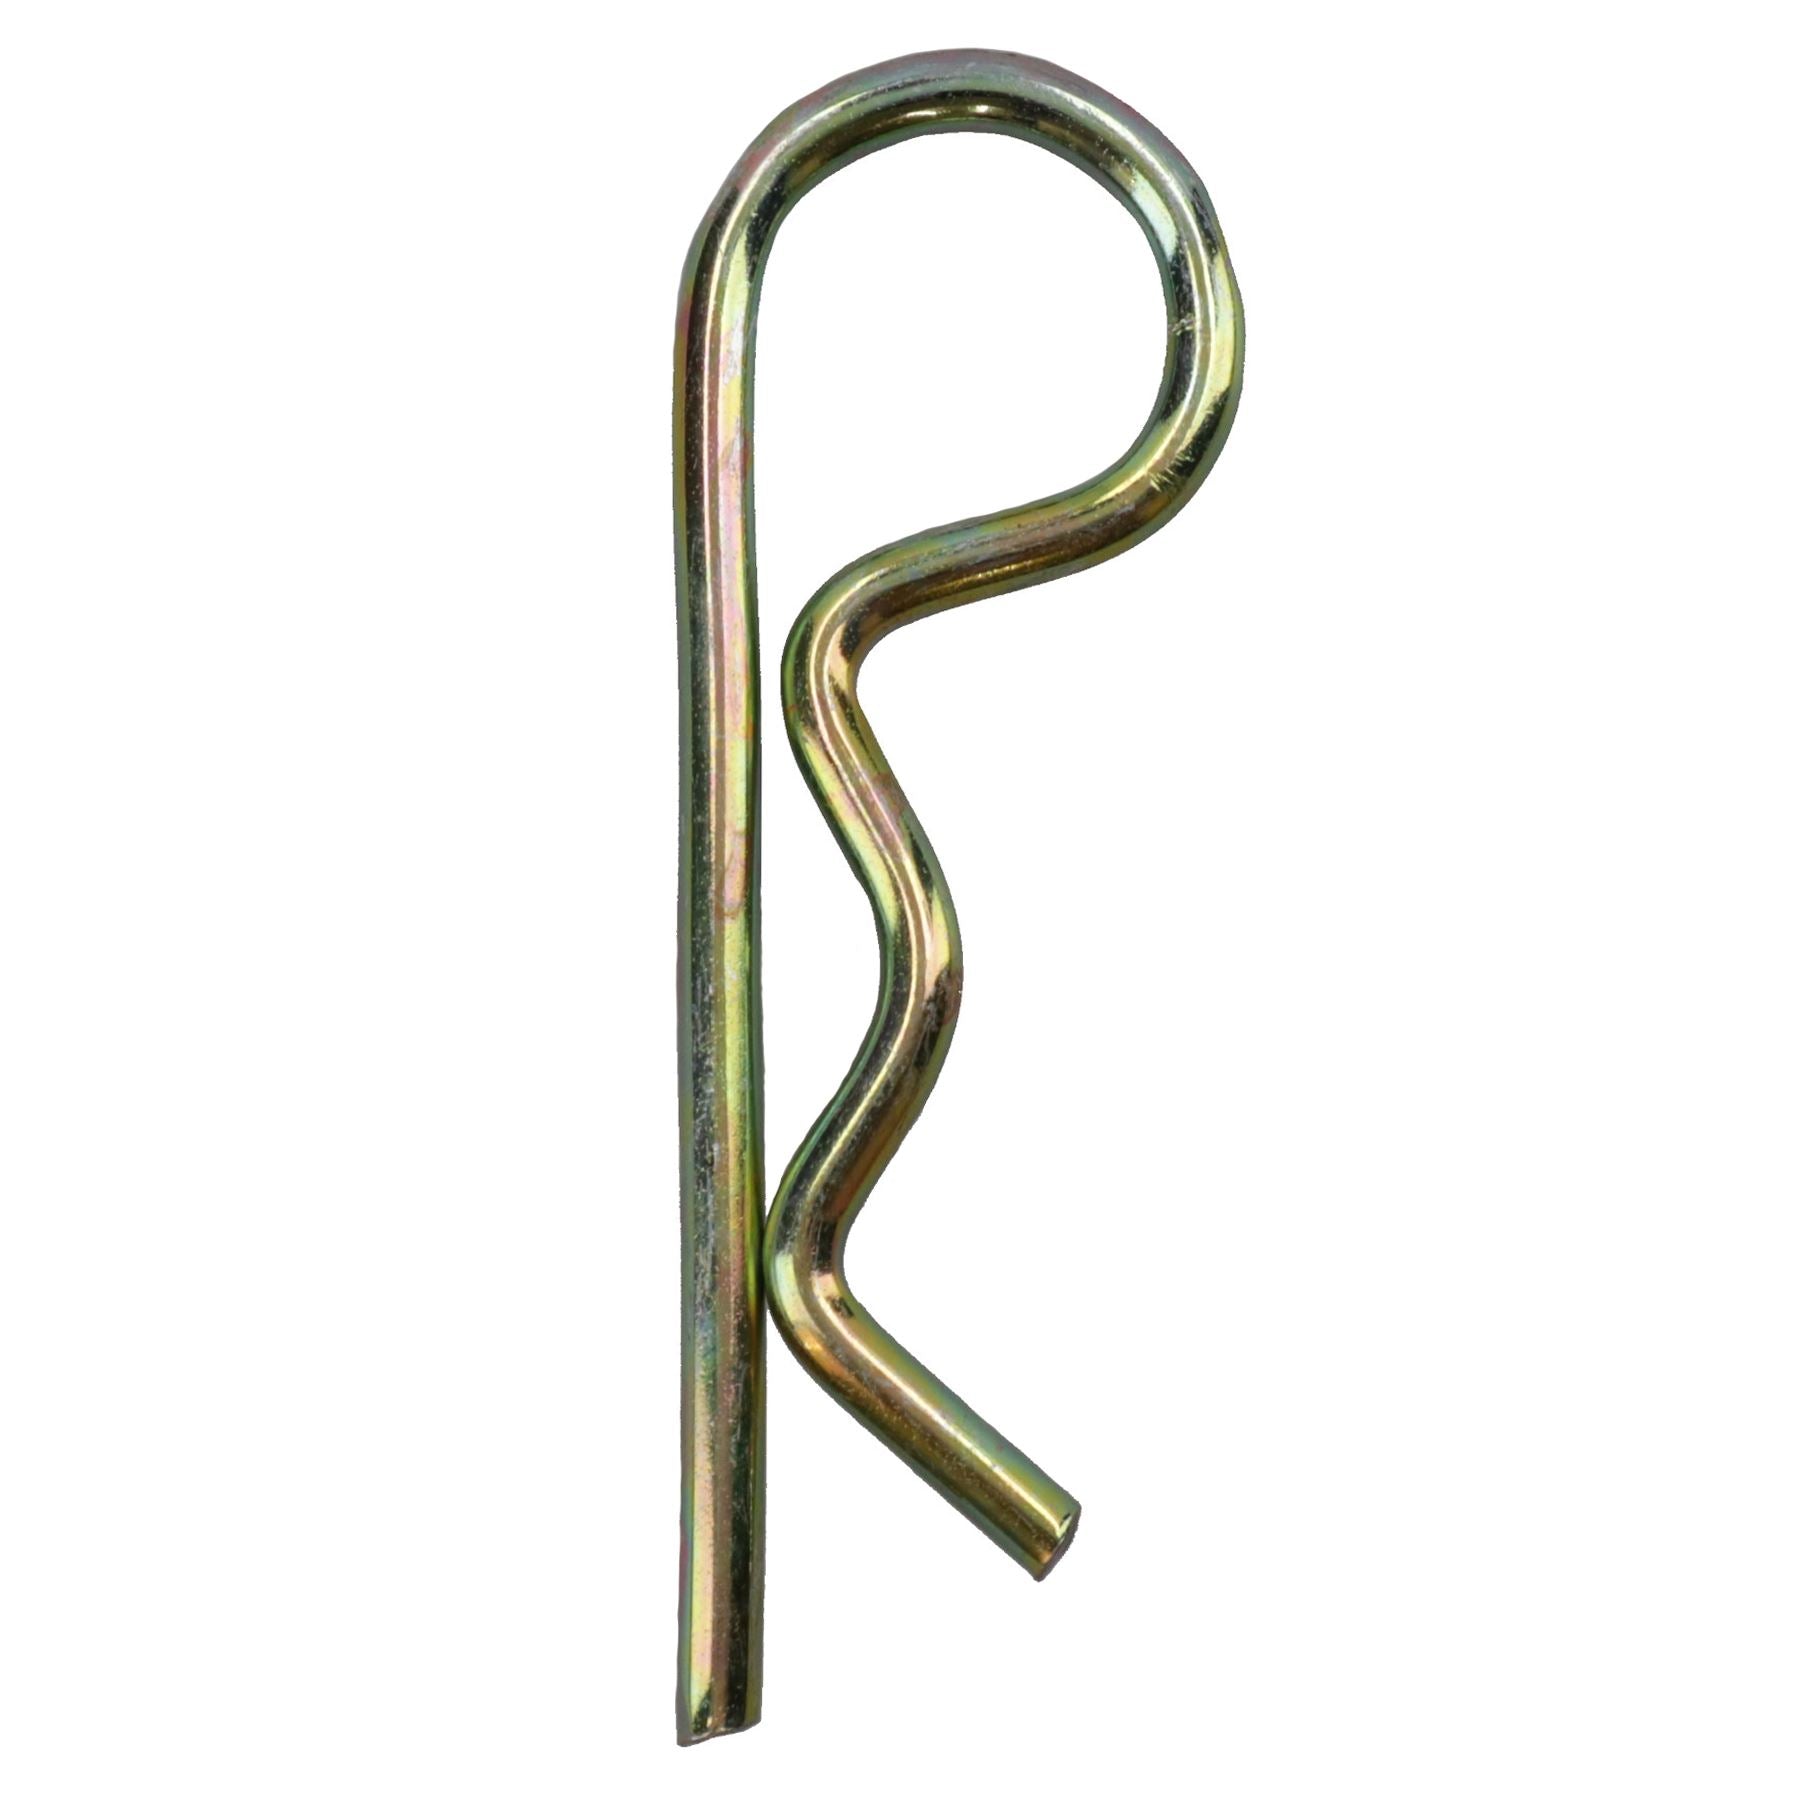 6mm R Clips Hair Pin Spring Cotter Pin Hitch Lynch Cotter Zinc Plated Steel